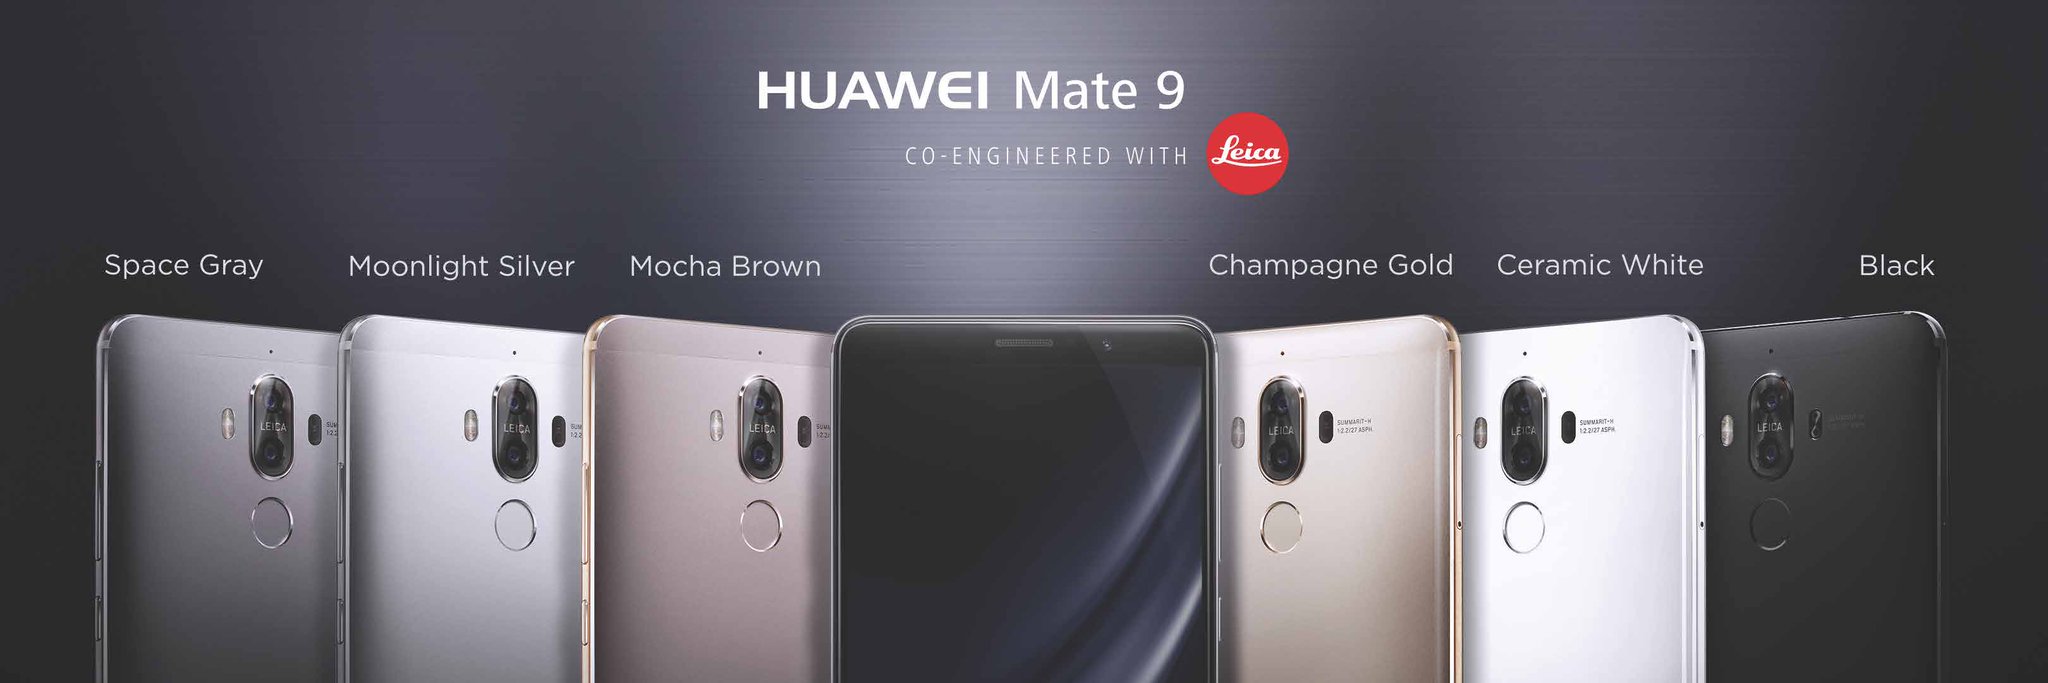 schelp verwijzen combineren Huawei announces the Mate 9 with giant display and battery – Phandroid